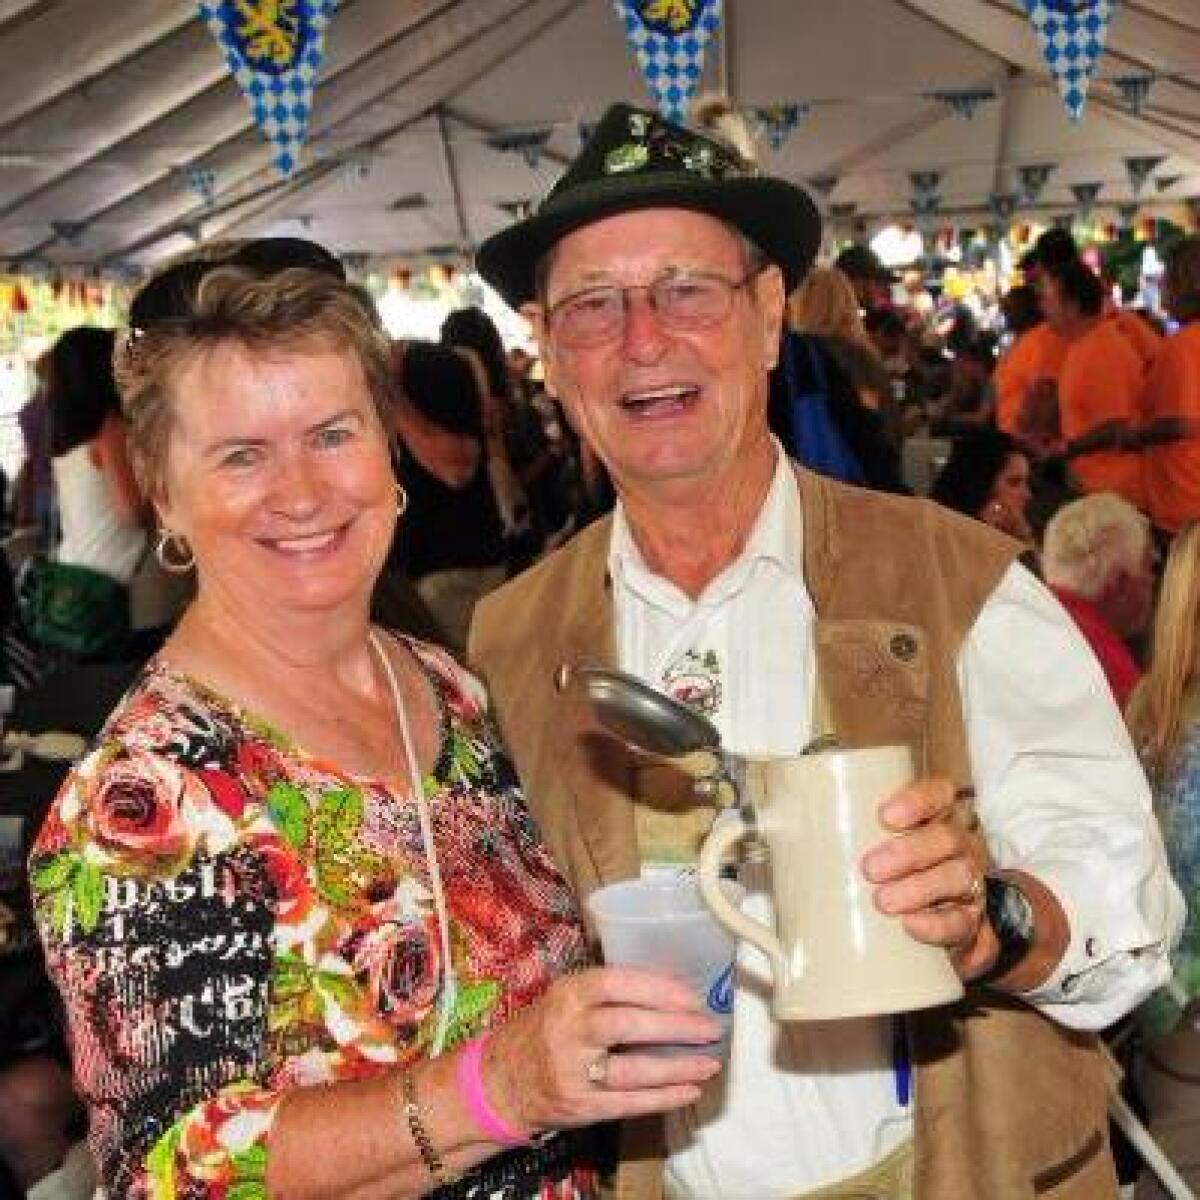 The 24th Annual Chamber of Commerce Encinitas Oktoberfest will be held 10 a.m. to 6 p.m. Sunday, Sept. 29.